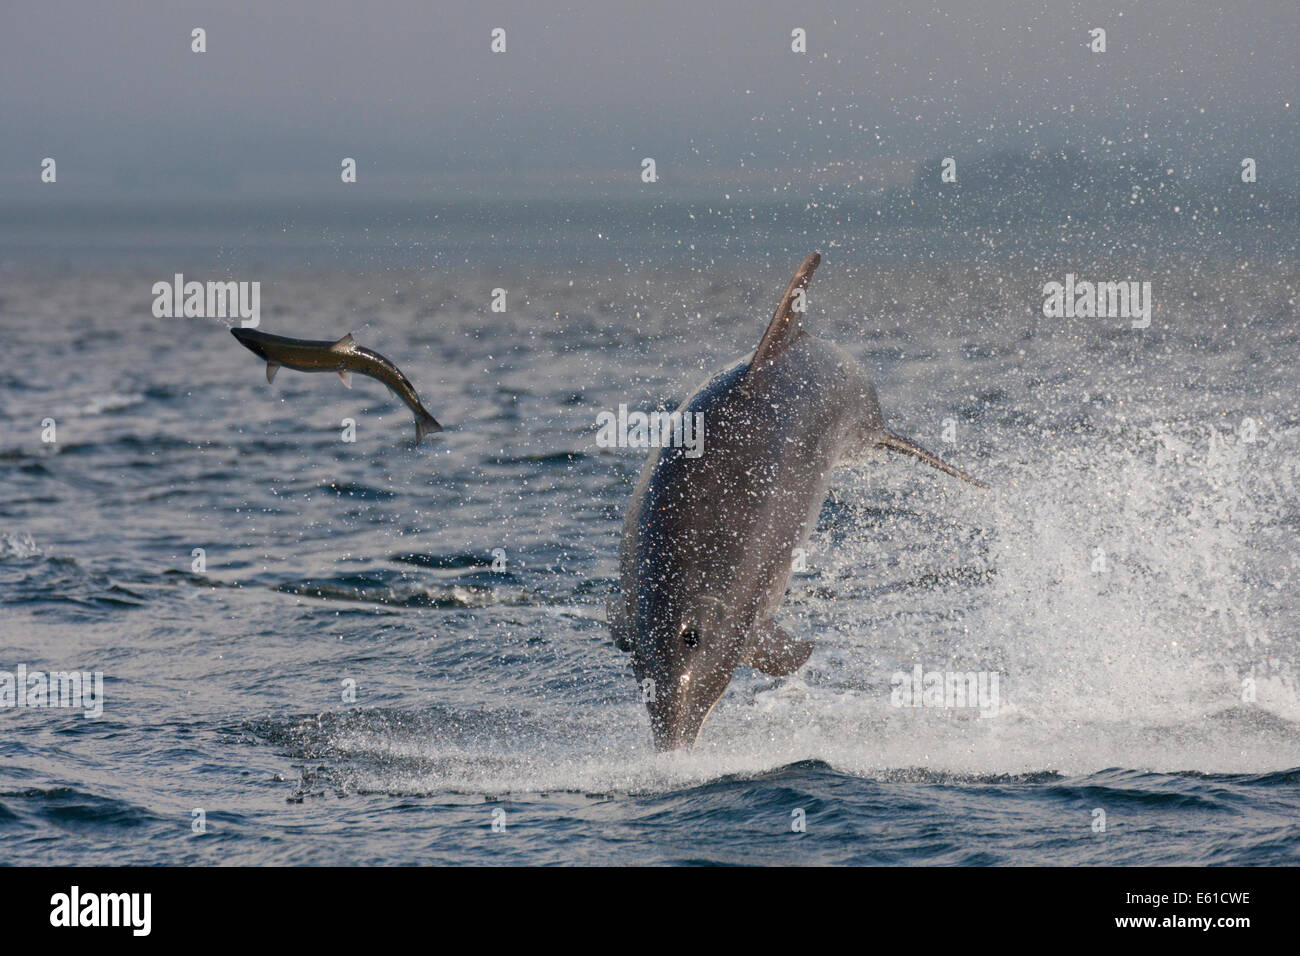 Bottlenose dolphin (Tursiops truncatus) hunting a fish (salmon), Chanonry Point, Moray Firth, Highlands, Scotland UK Stock Photo